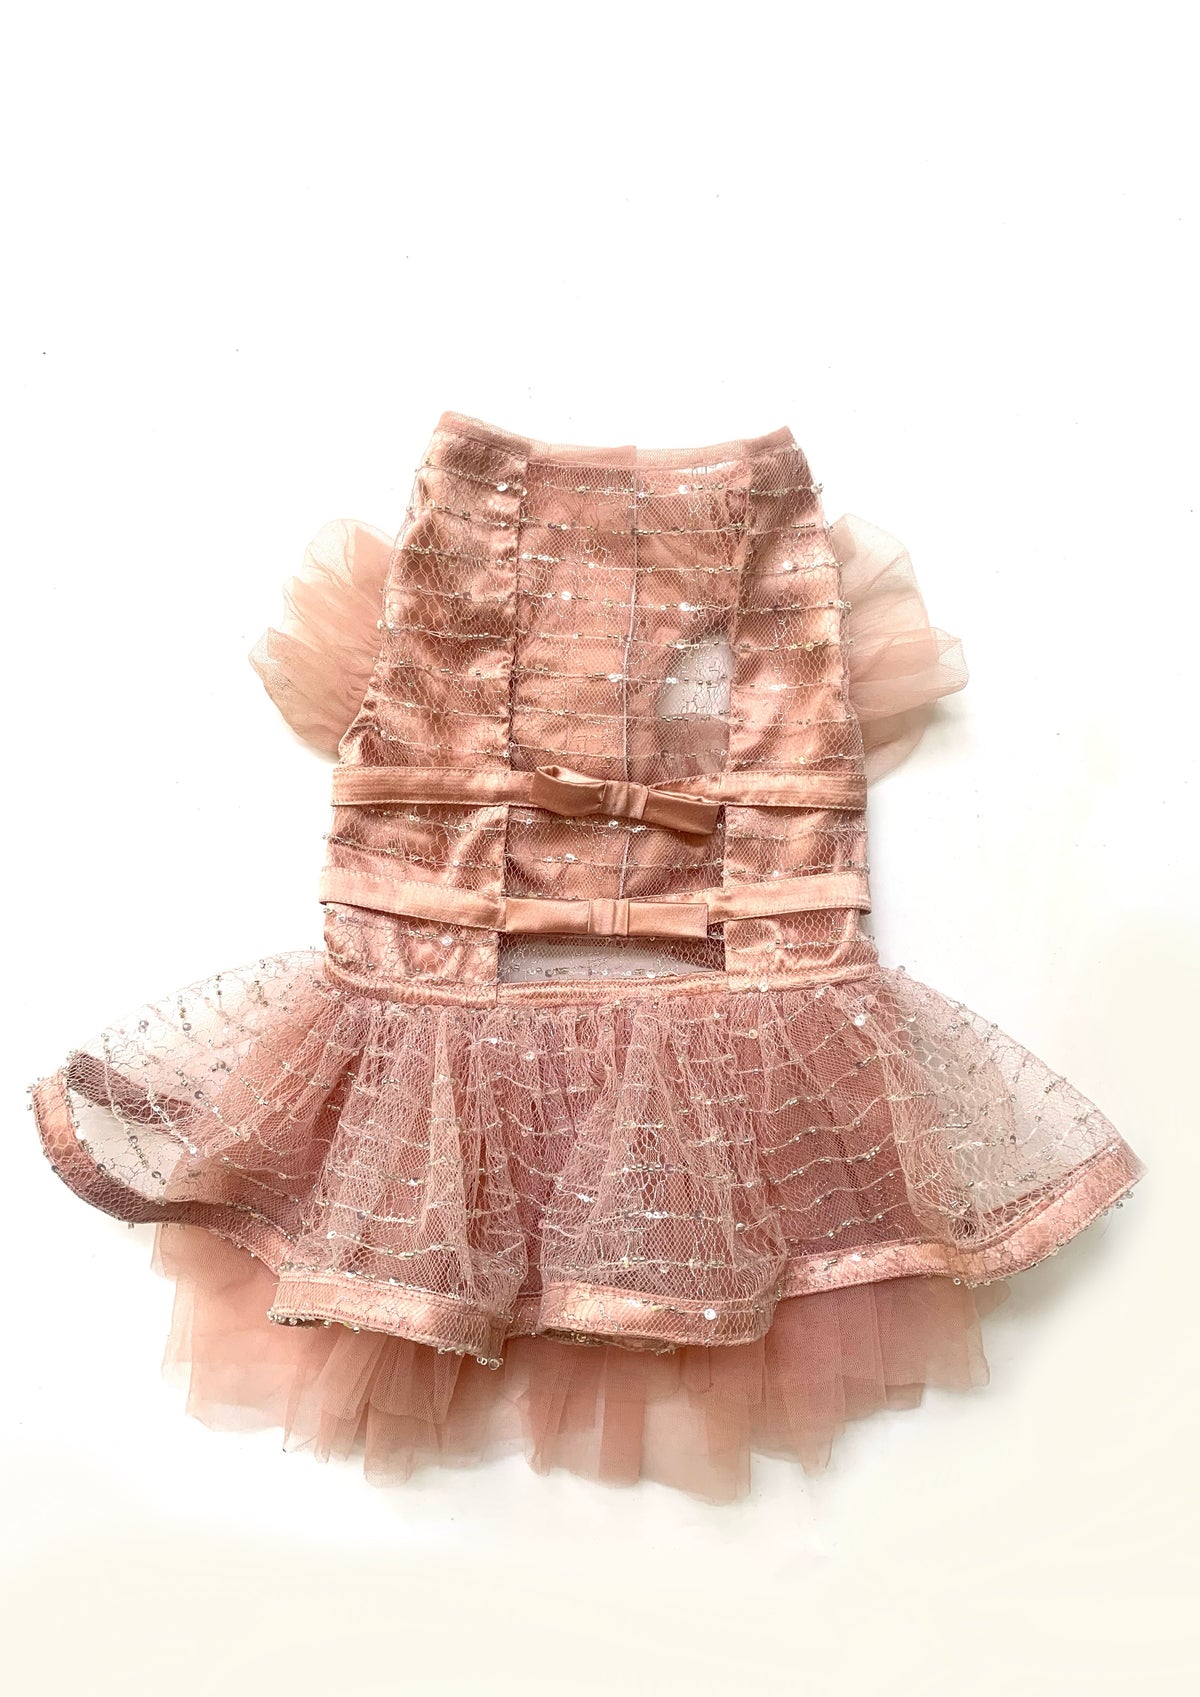 FROSTED PINK TUTU DRESS